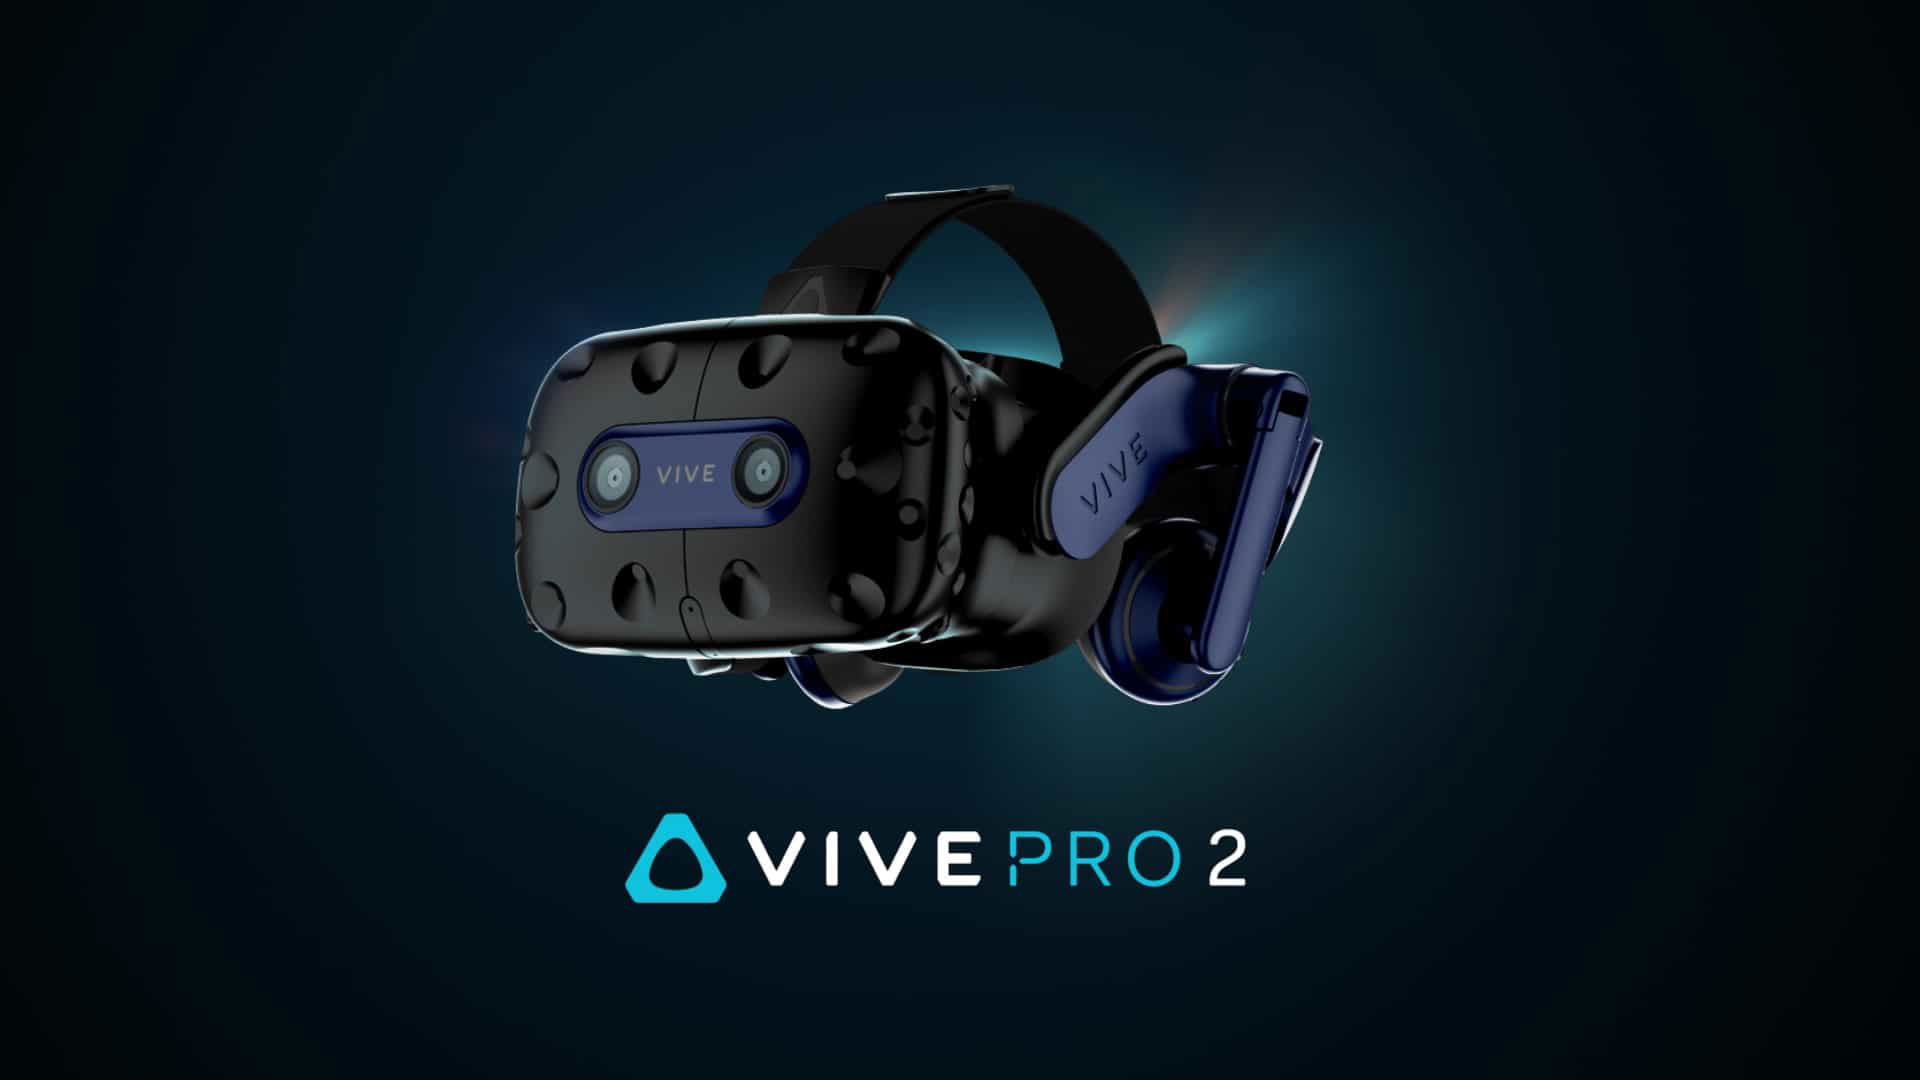 The HTC Vive Pro 2 is a premium virtual reality headset.